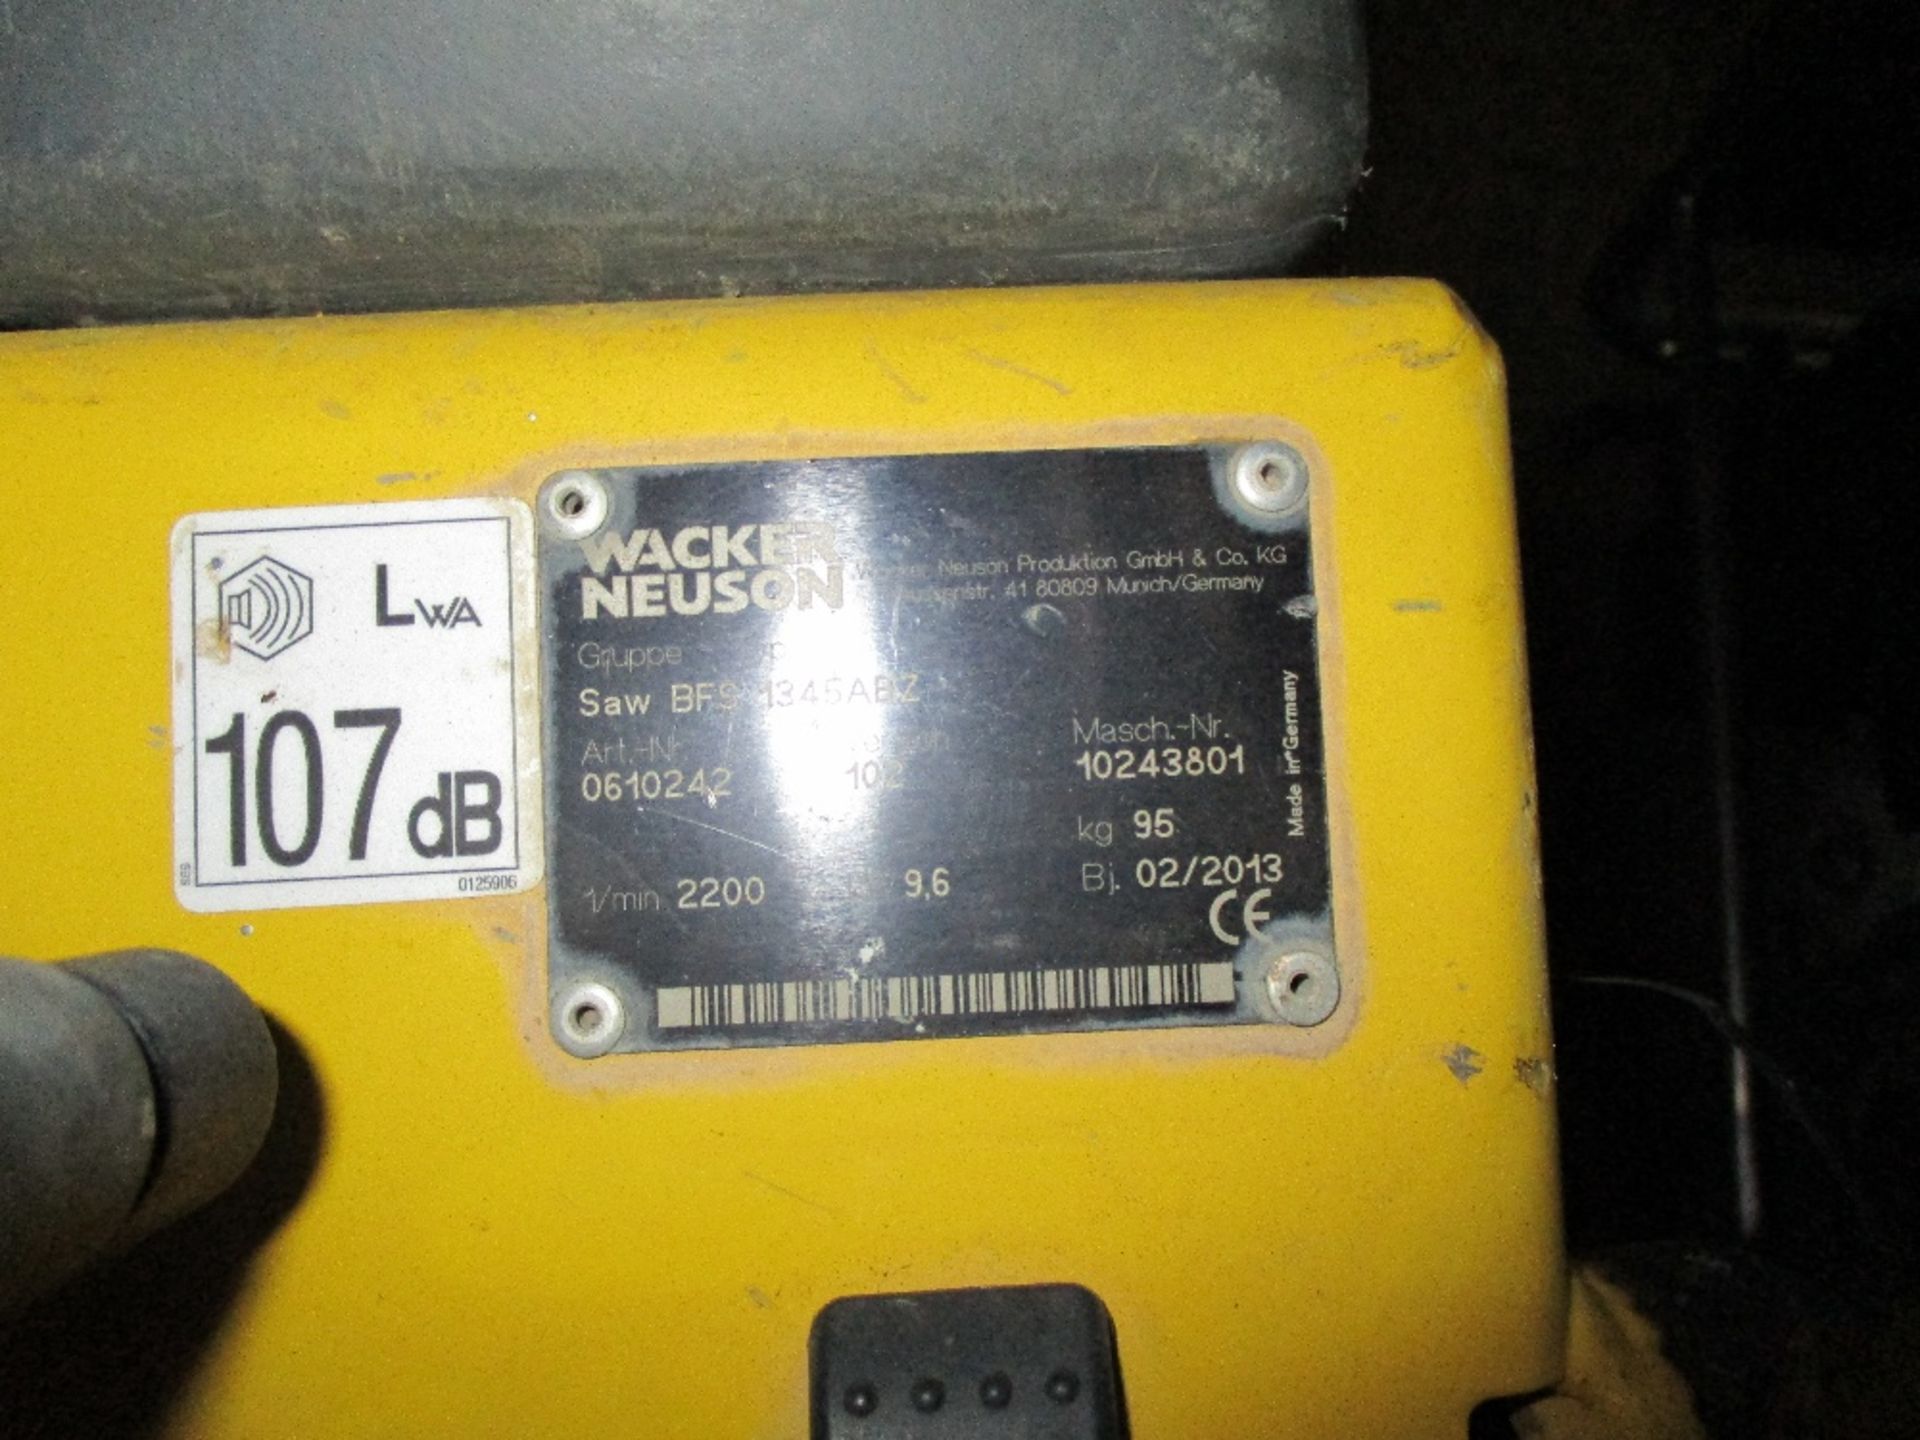 Wacker BFS 1345 ABZ floor saw, yr2013 WHEN TESTED WAS SEEN RUNNING SOLD UNDER THE AUCTIONEERS MARGIN - Image 3 of 3